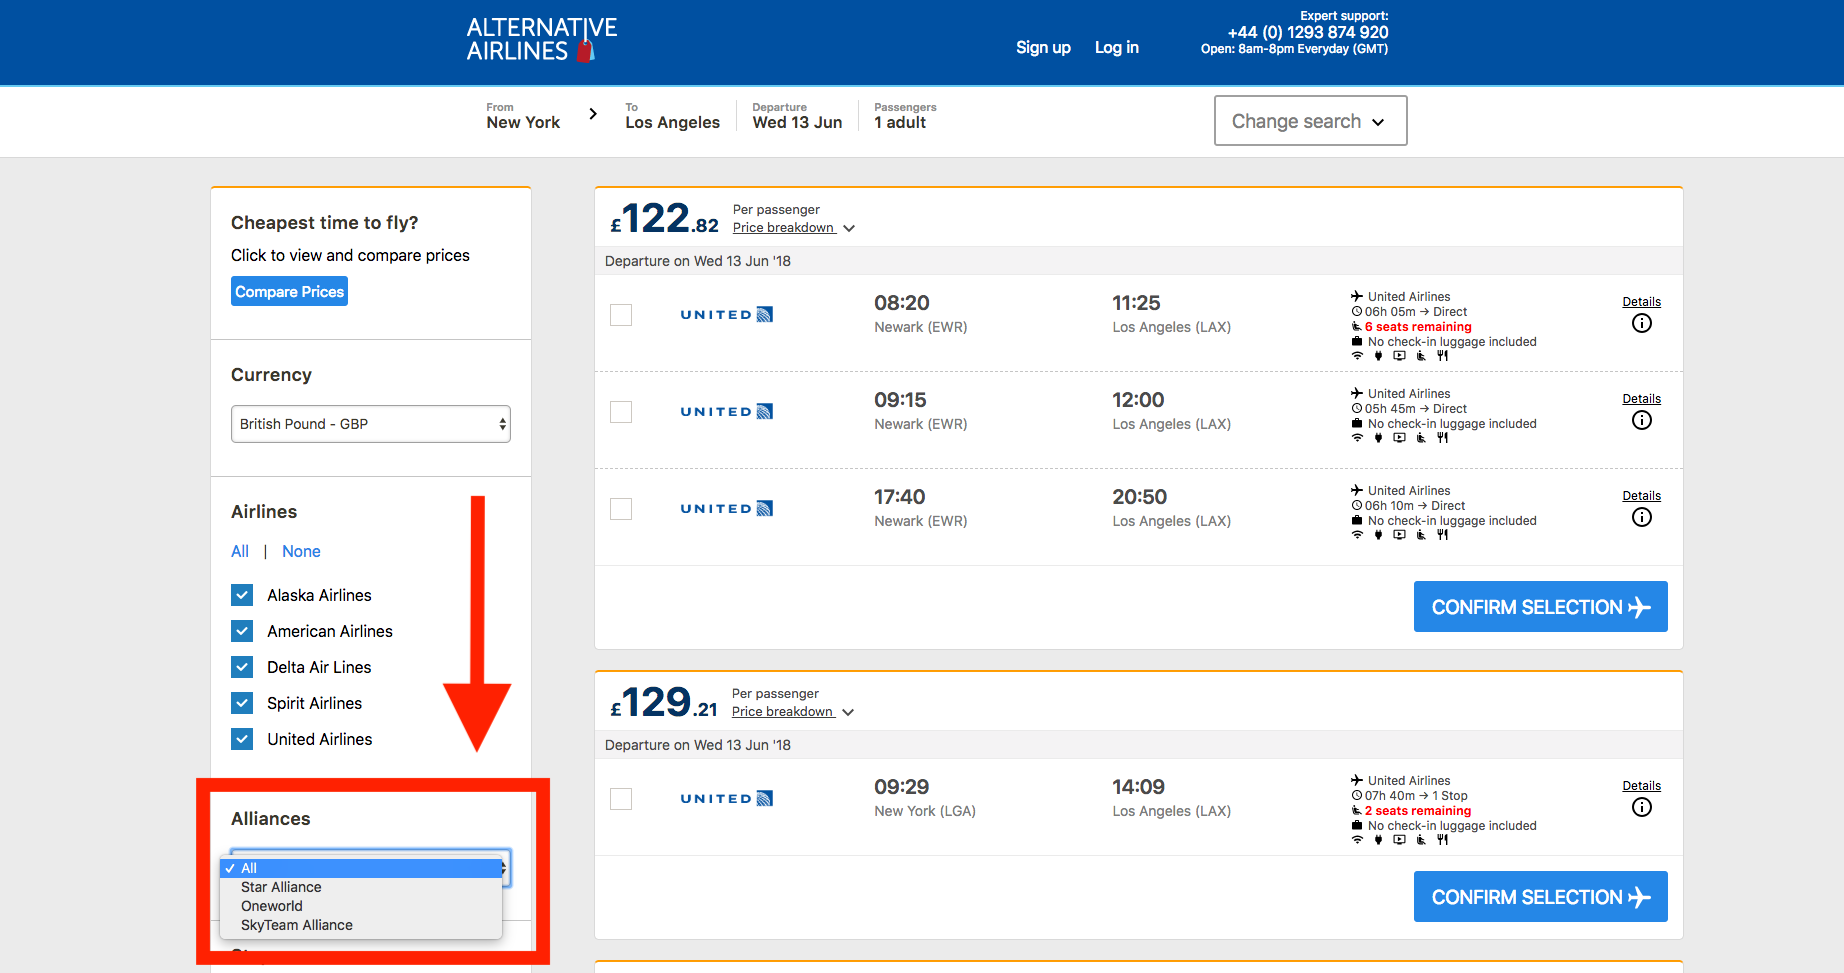 How to Book with Airline Alliance - Step 2